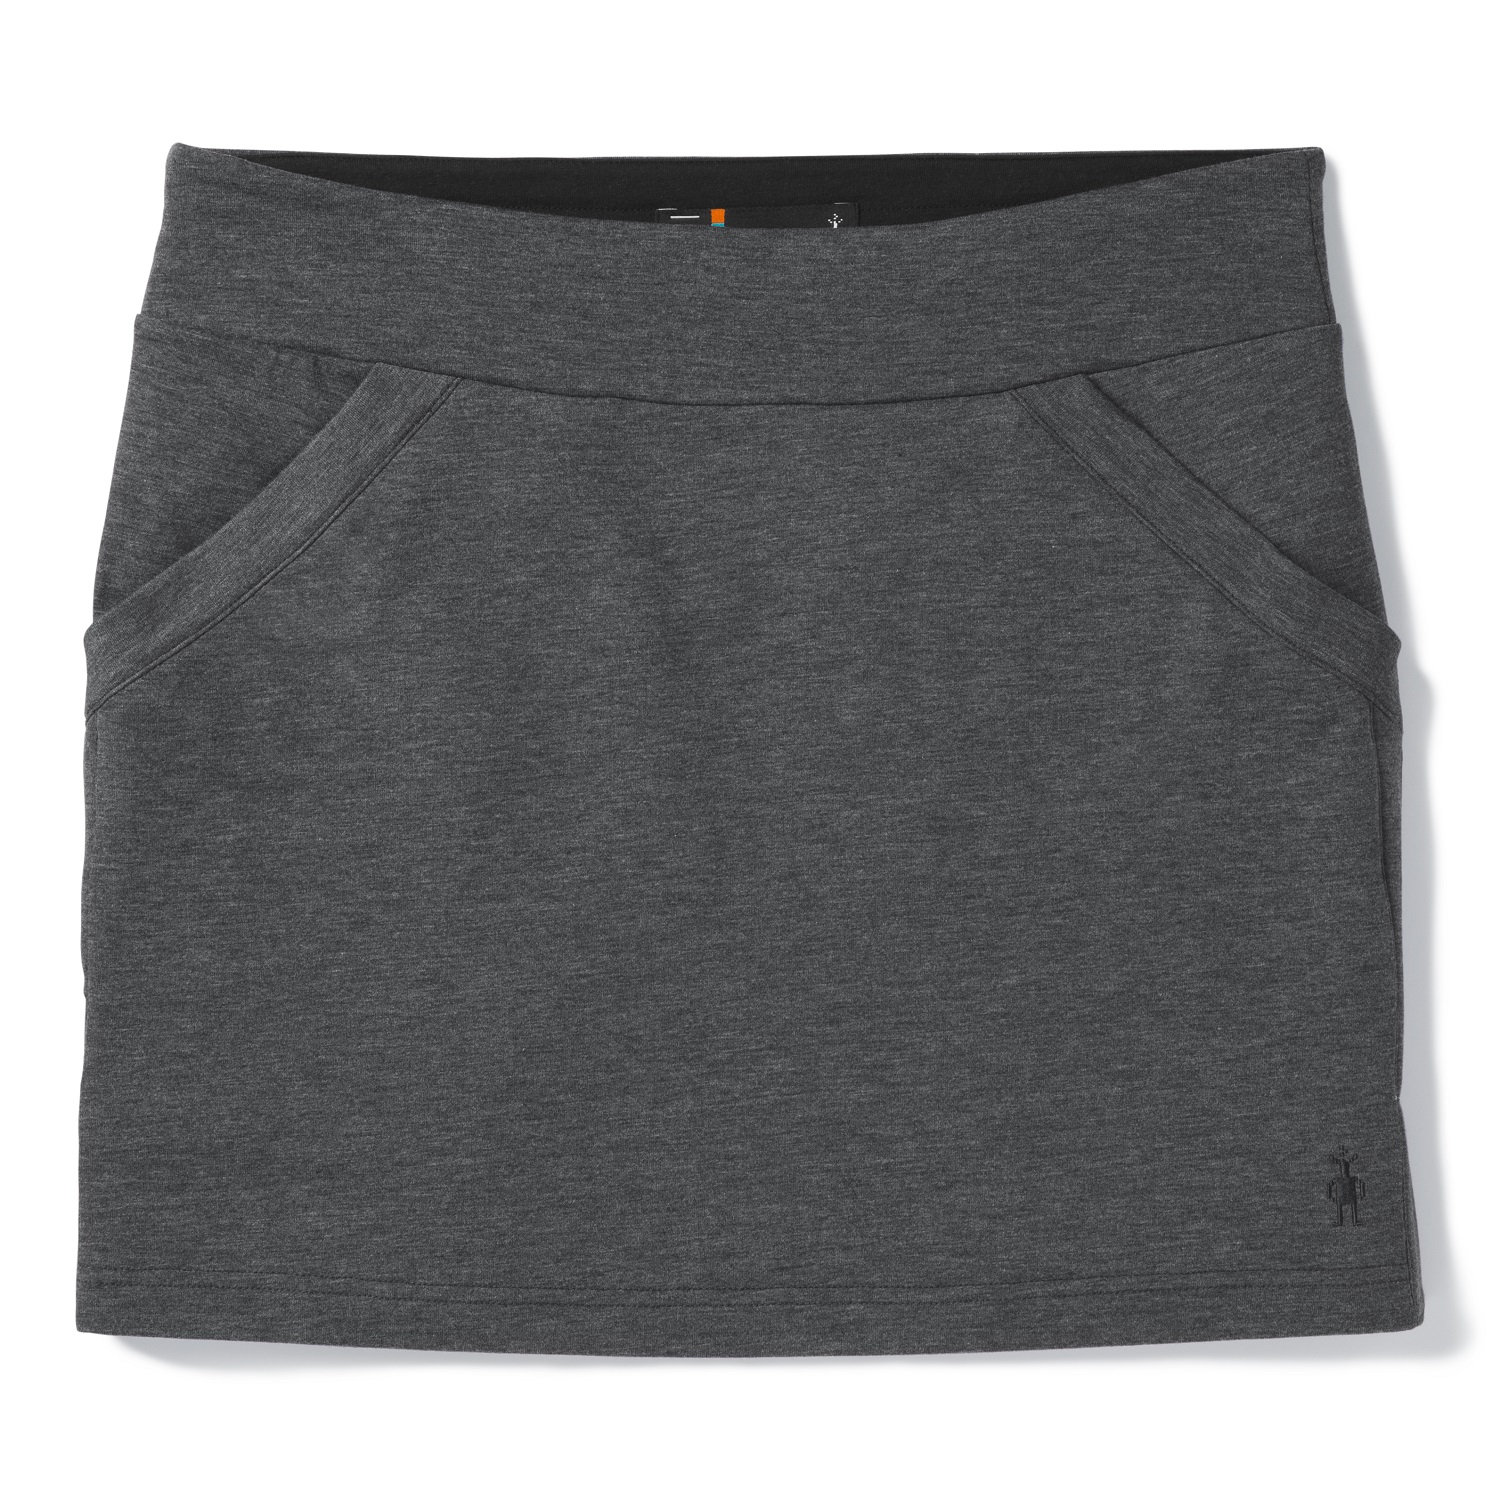 Smartwool Womens Active Reset Skirt SW016149 size xs, M, L, XL2